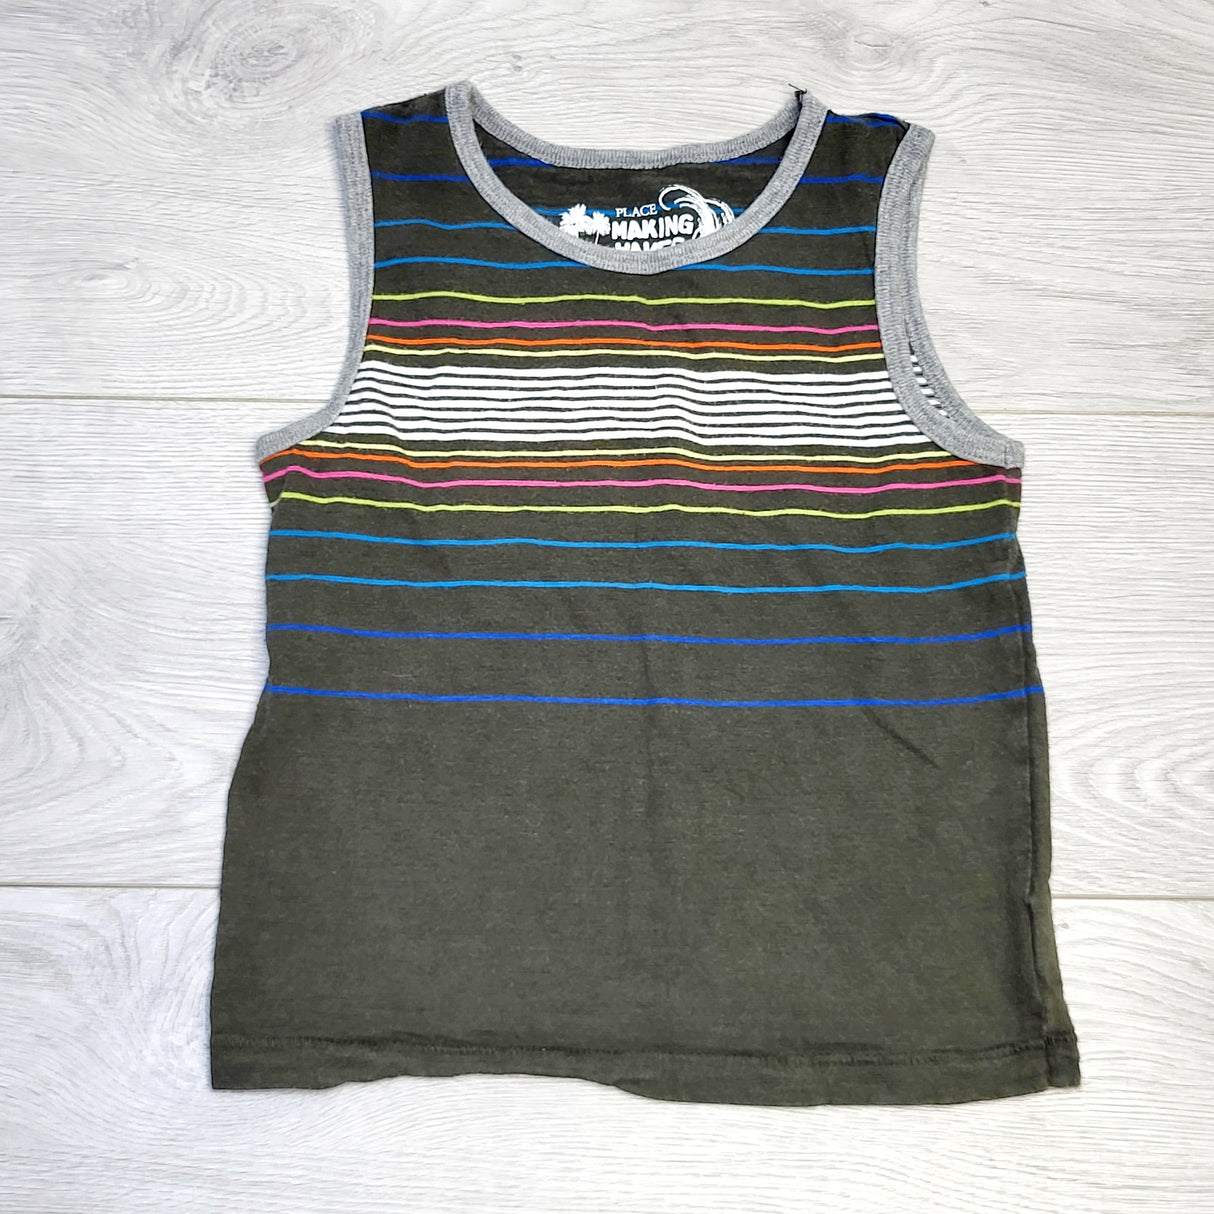 ANHA1 - Children's Place green striped tank top, size 3T